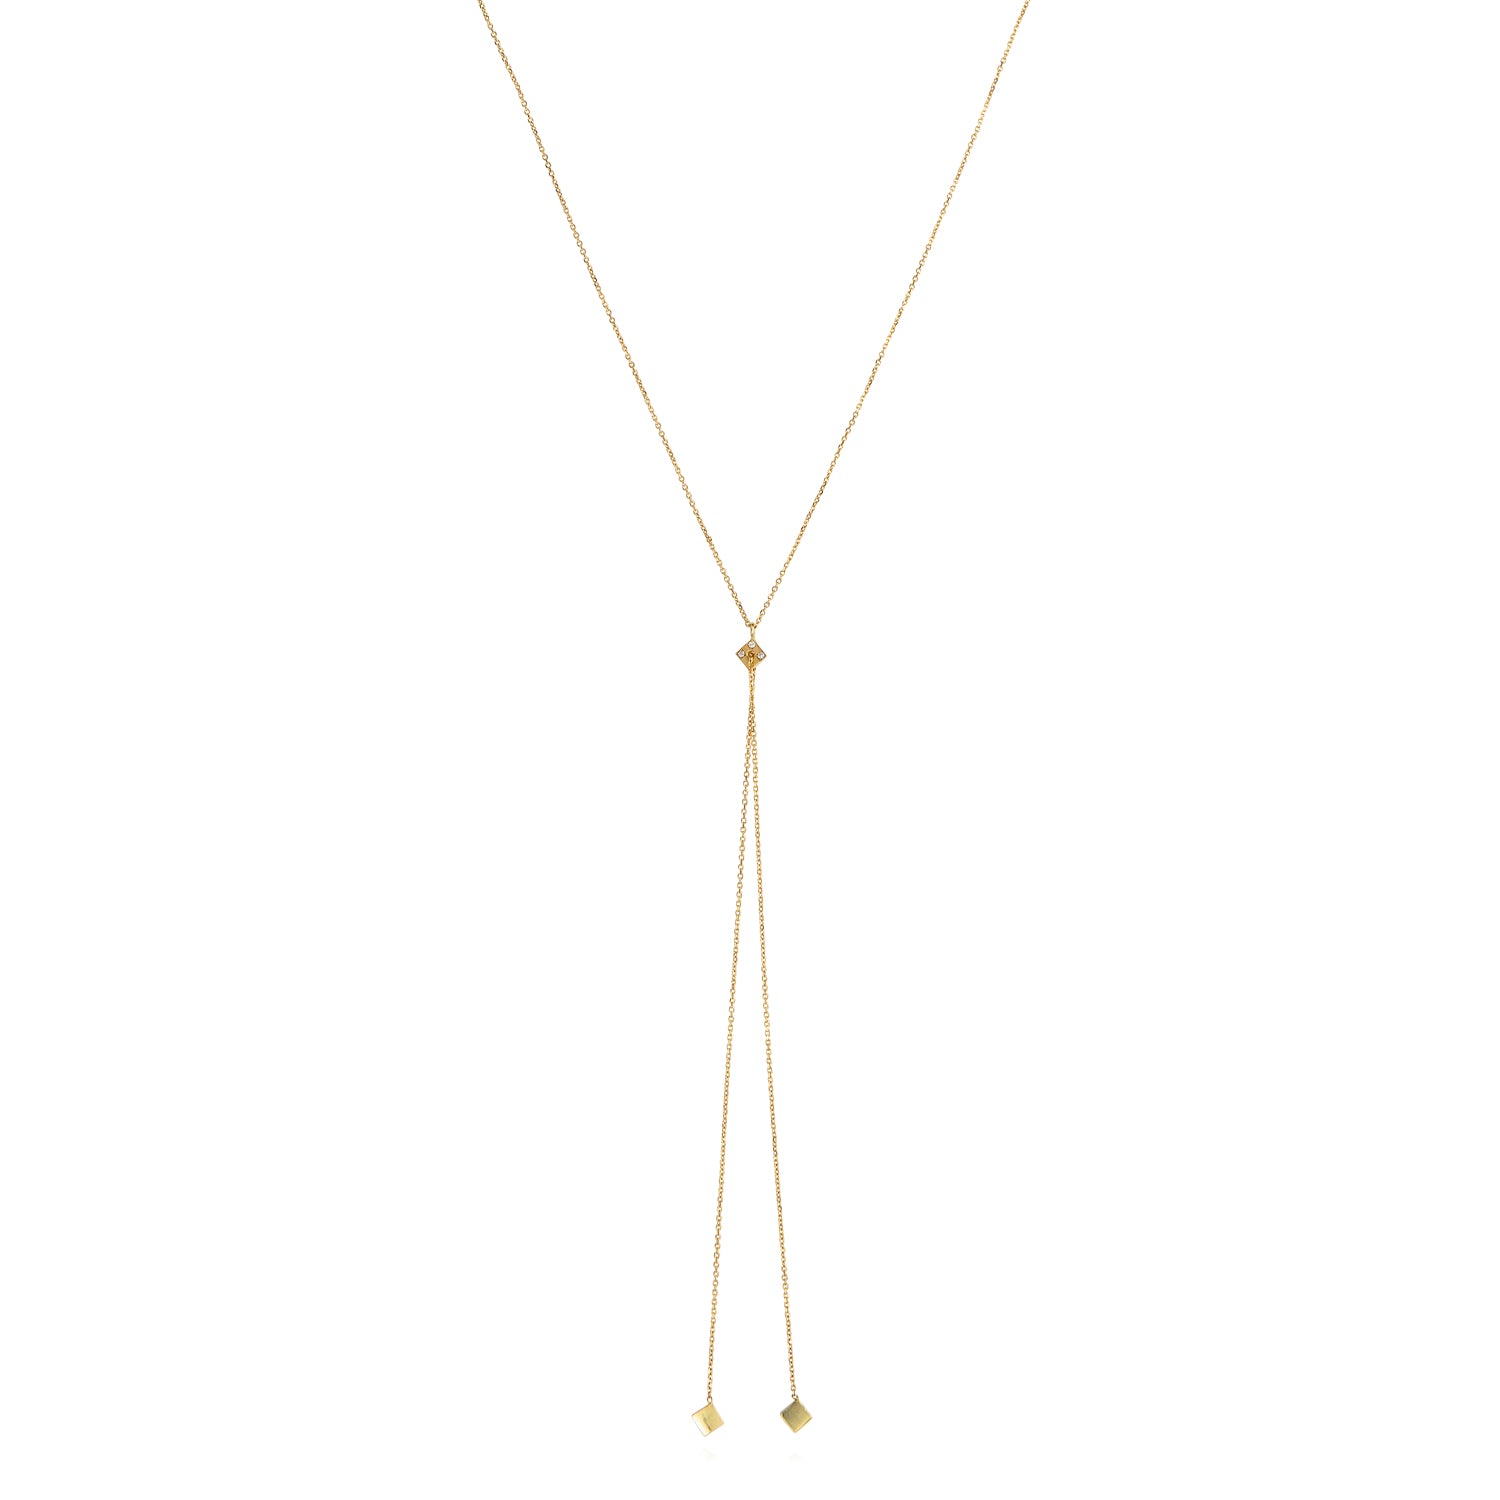 18ct yellow gold necklace with diamond pave set square pendant, through which a threaded golden tail sits with hanging square gold ends. The collection was inspired by favourite family games and the serendipitous charm of the dice.